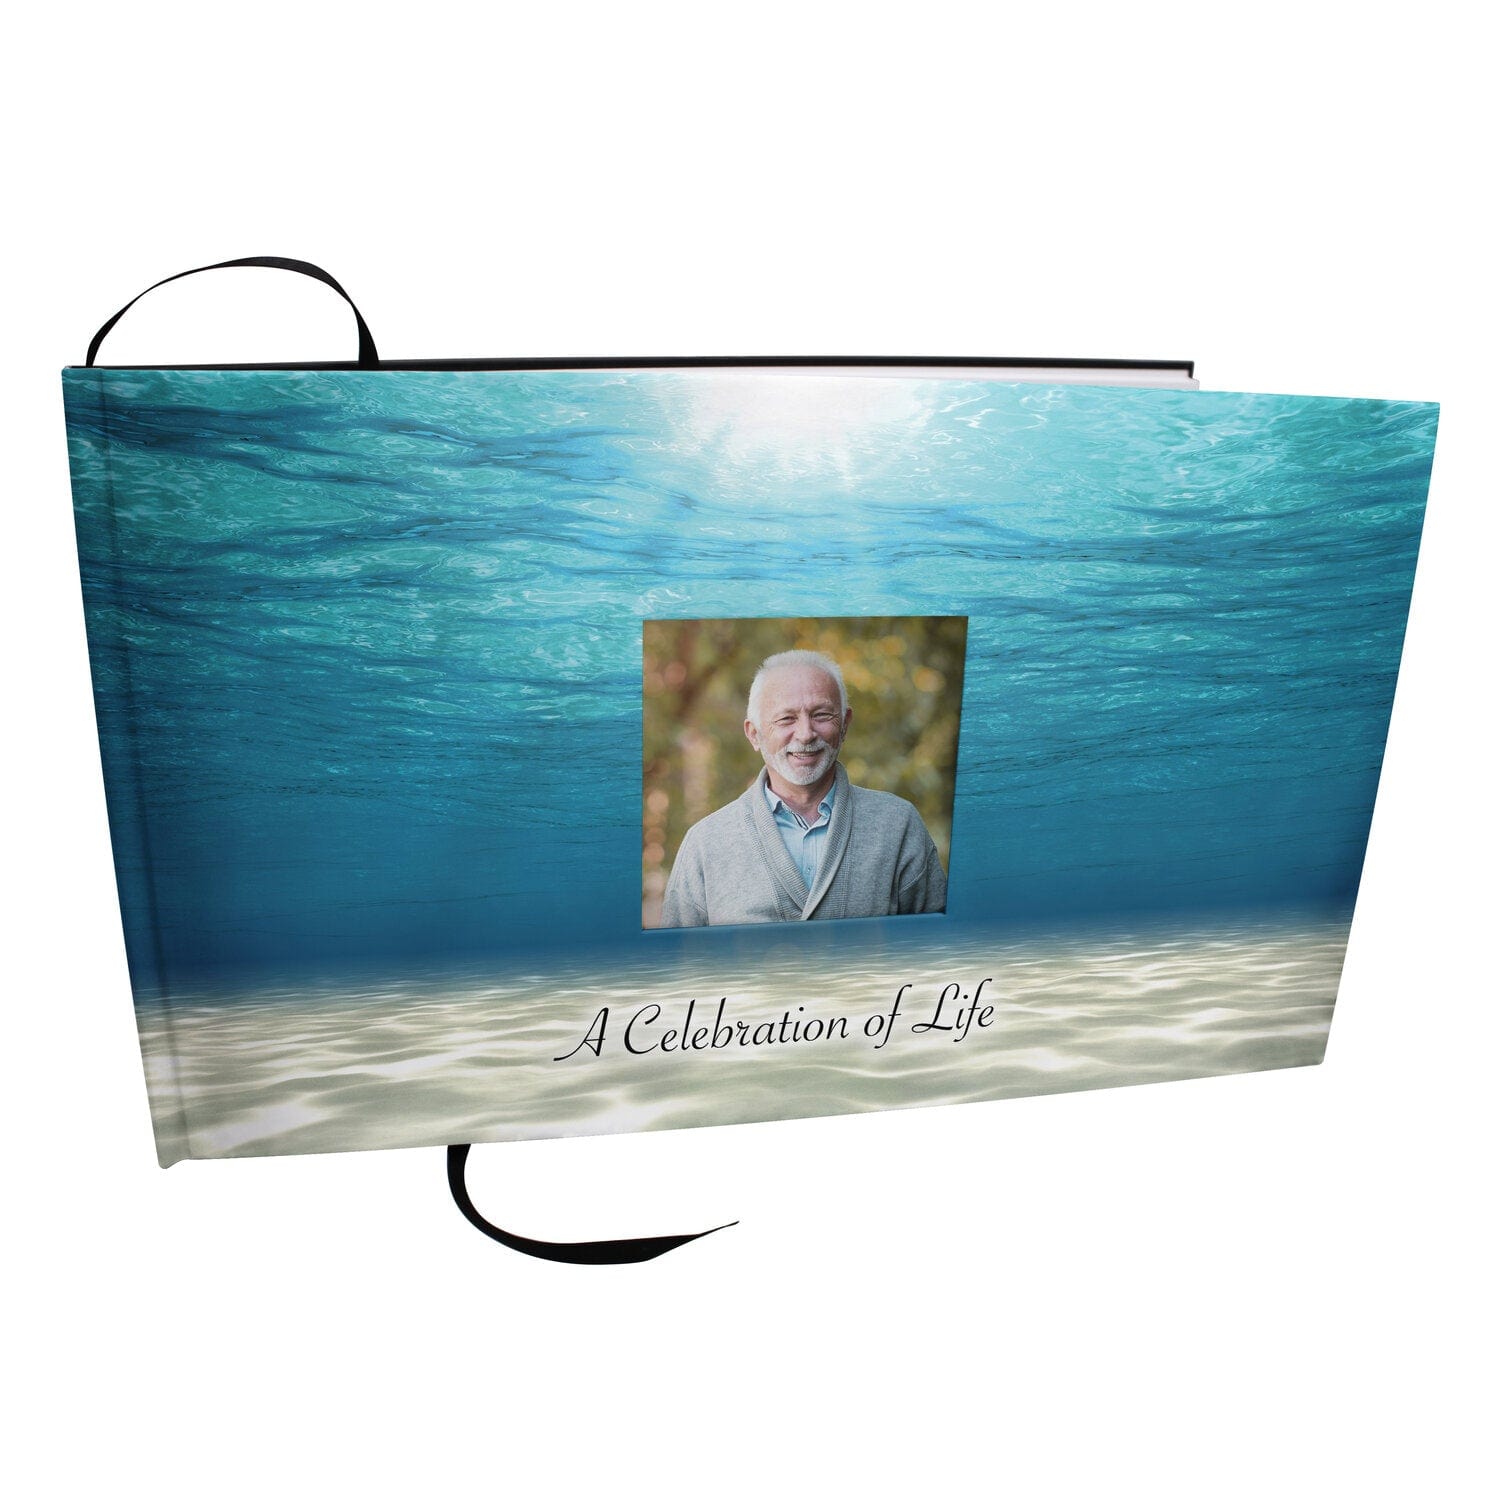 Commemorative Cremation Urns Oceanic Matching Themed 'Celebration of Life' Guest Book for Funeral or Memorial Service